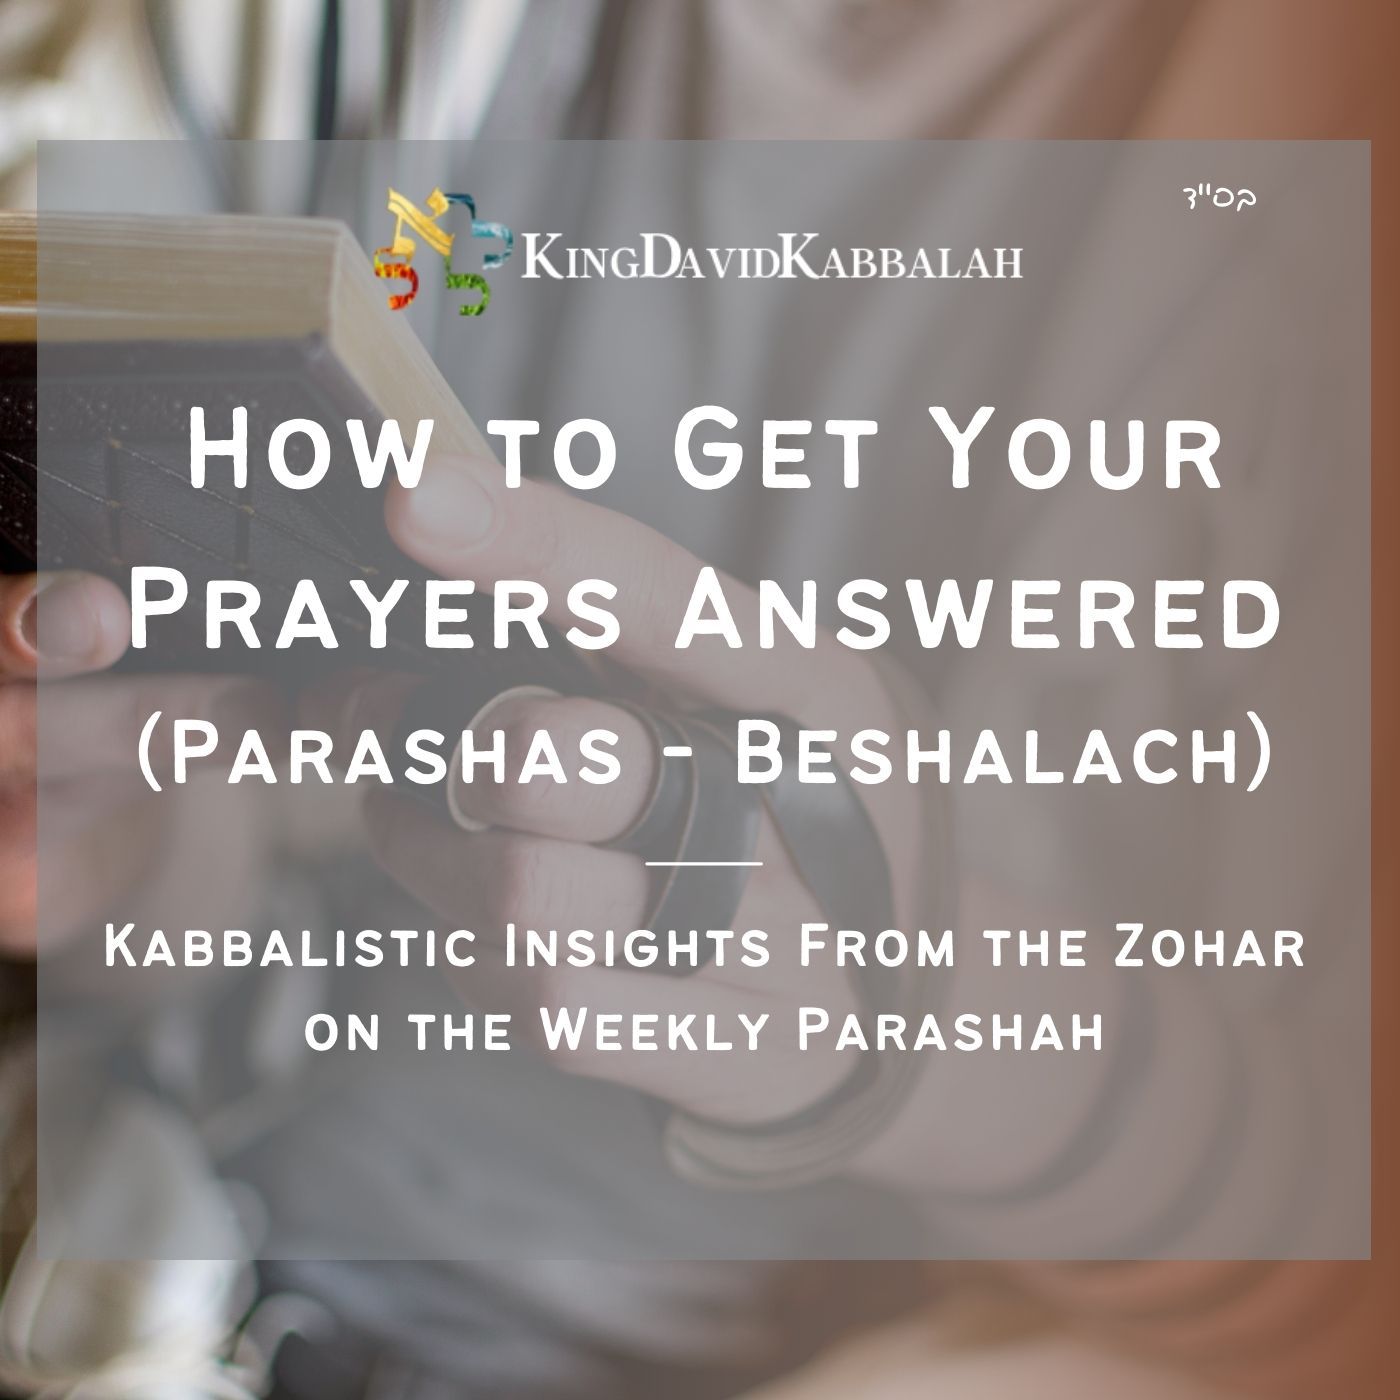 How to Get Your Prayers Answered - Kabbalistic Inspiration on the Parasha from the Zohar